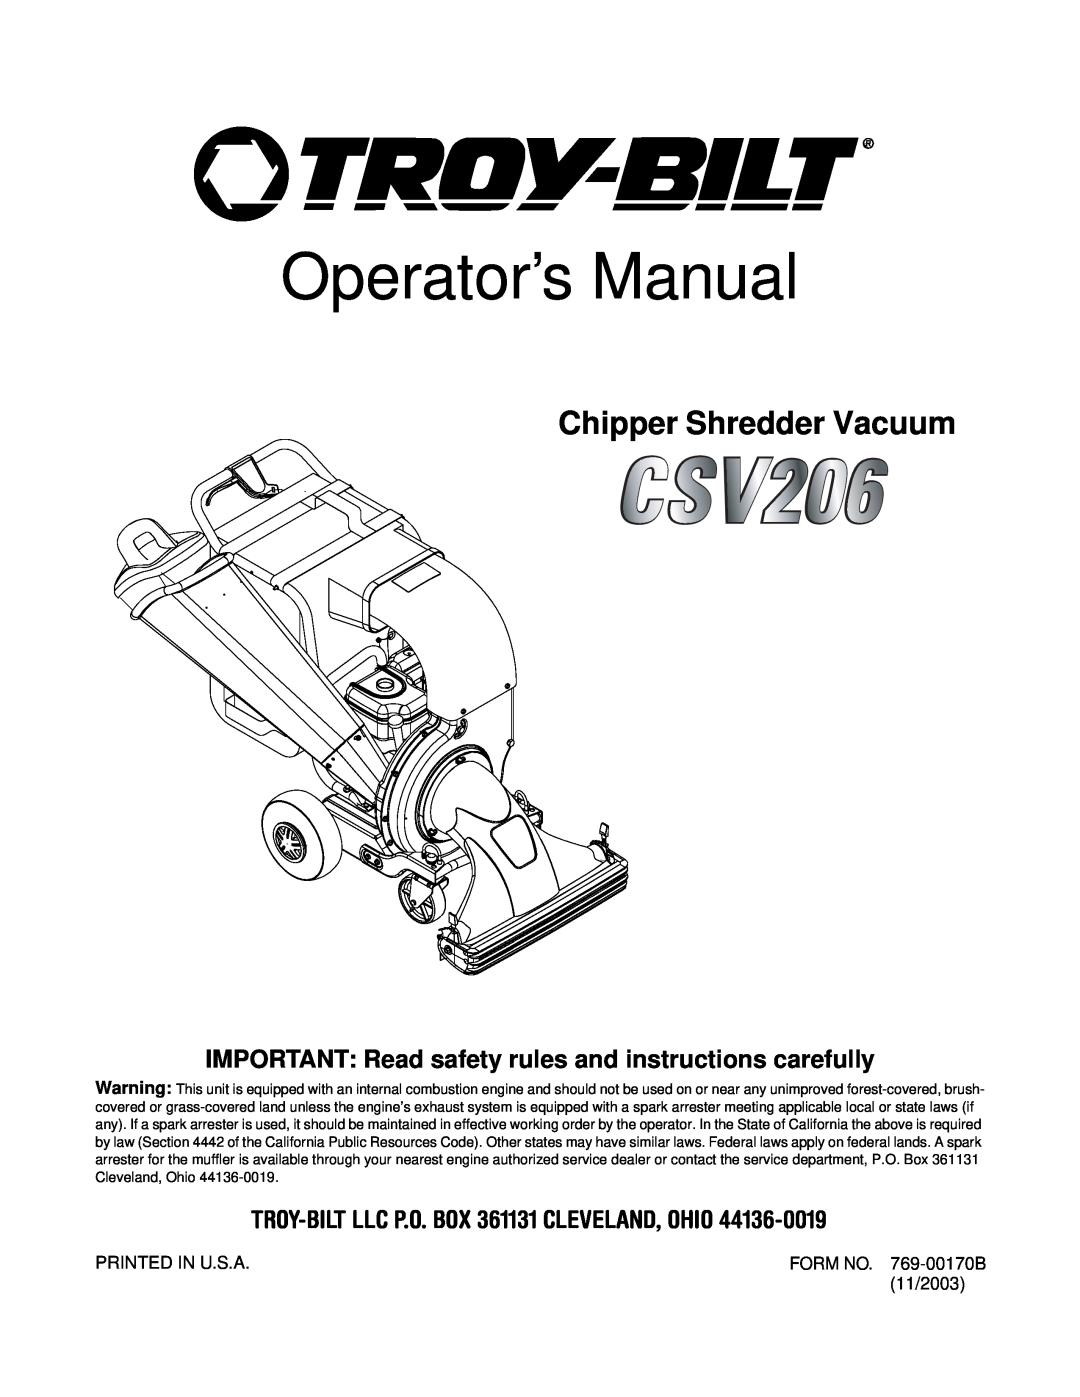 Troy-Bilt CSV206 manual Operator’s Manual, Chipper Shredder Vacuum, IMPORTANT Read safety rules and instructions carefully 